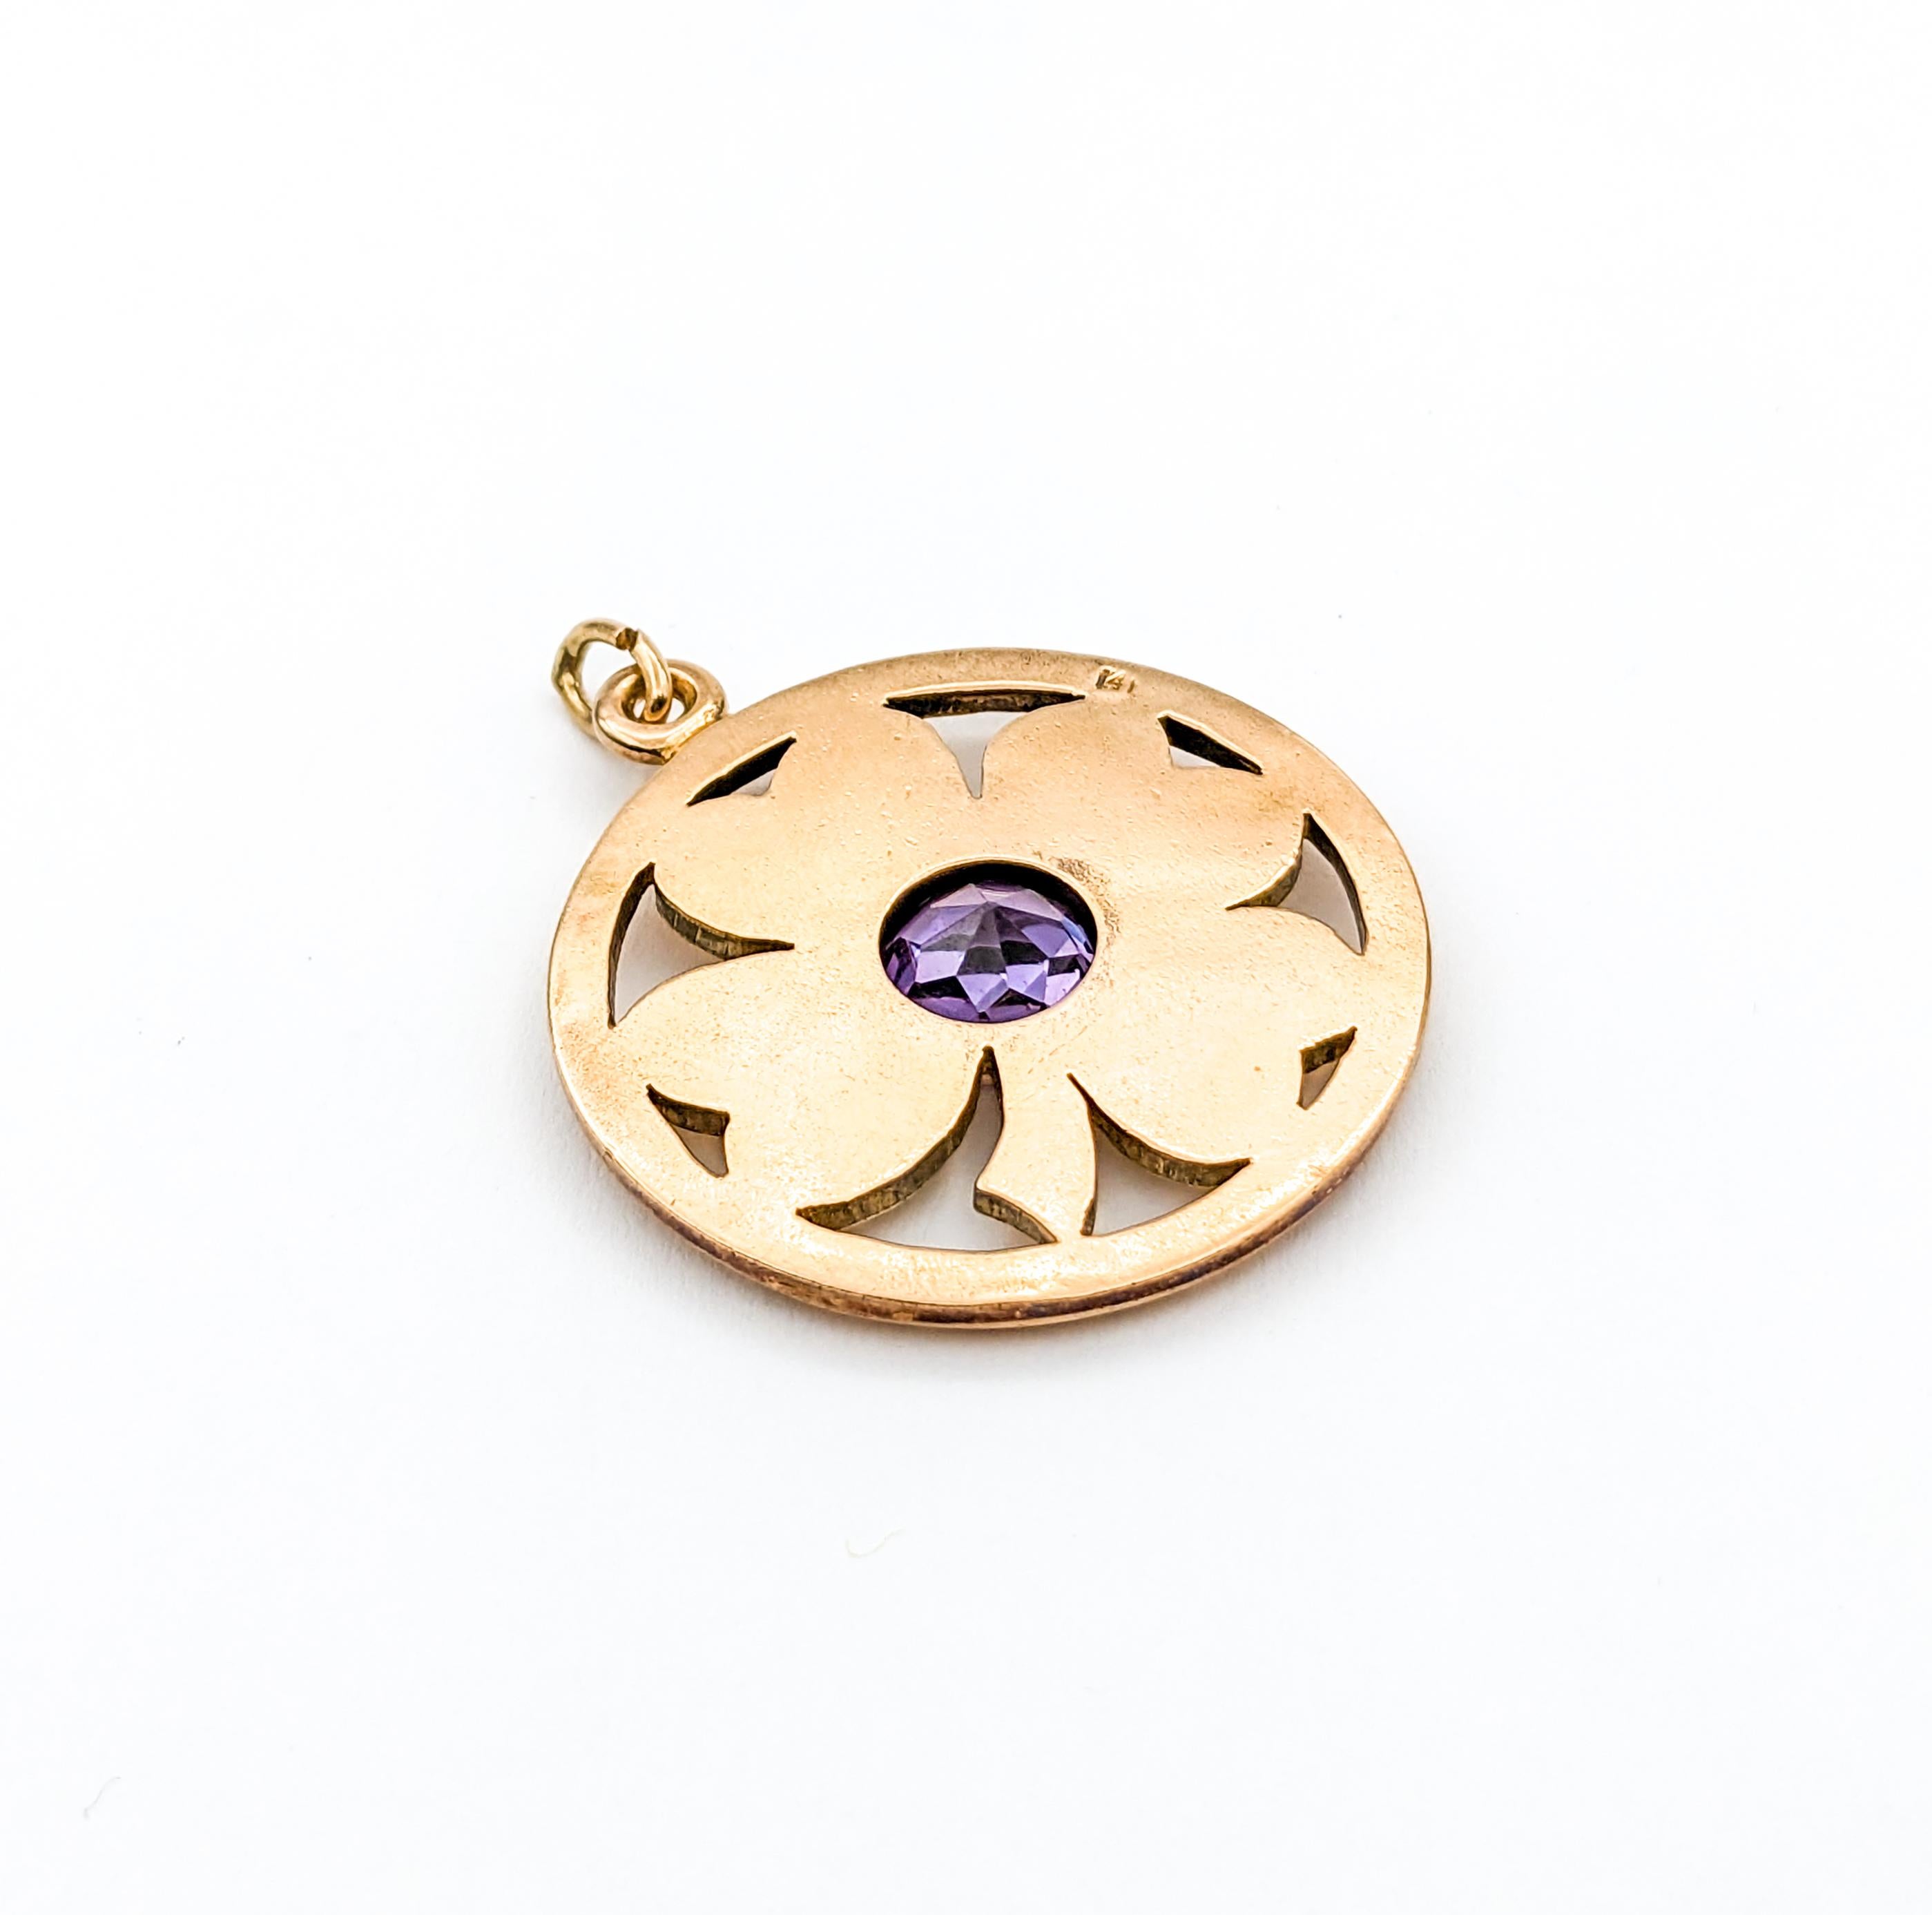 Whimsical Vintage Shamrock Lab Alexandrite Pendant in 14K Gold

Fall in love with this whimsical vintage clover pendant, meticulously shaped in 14k gold with a pink undertone. At its heart lies a radiant purple-blue 9mm (Estimated 2.25ct) Lab